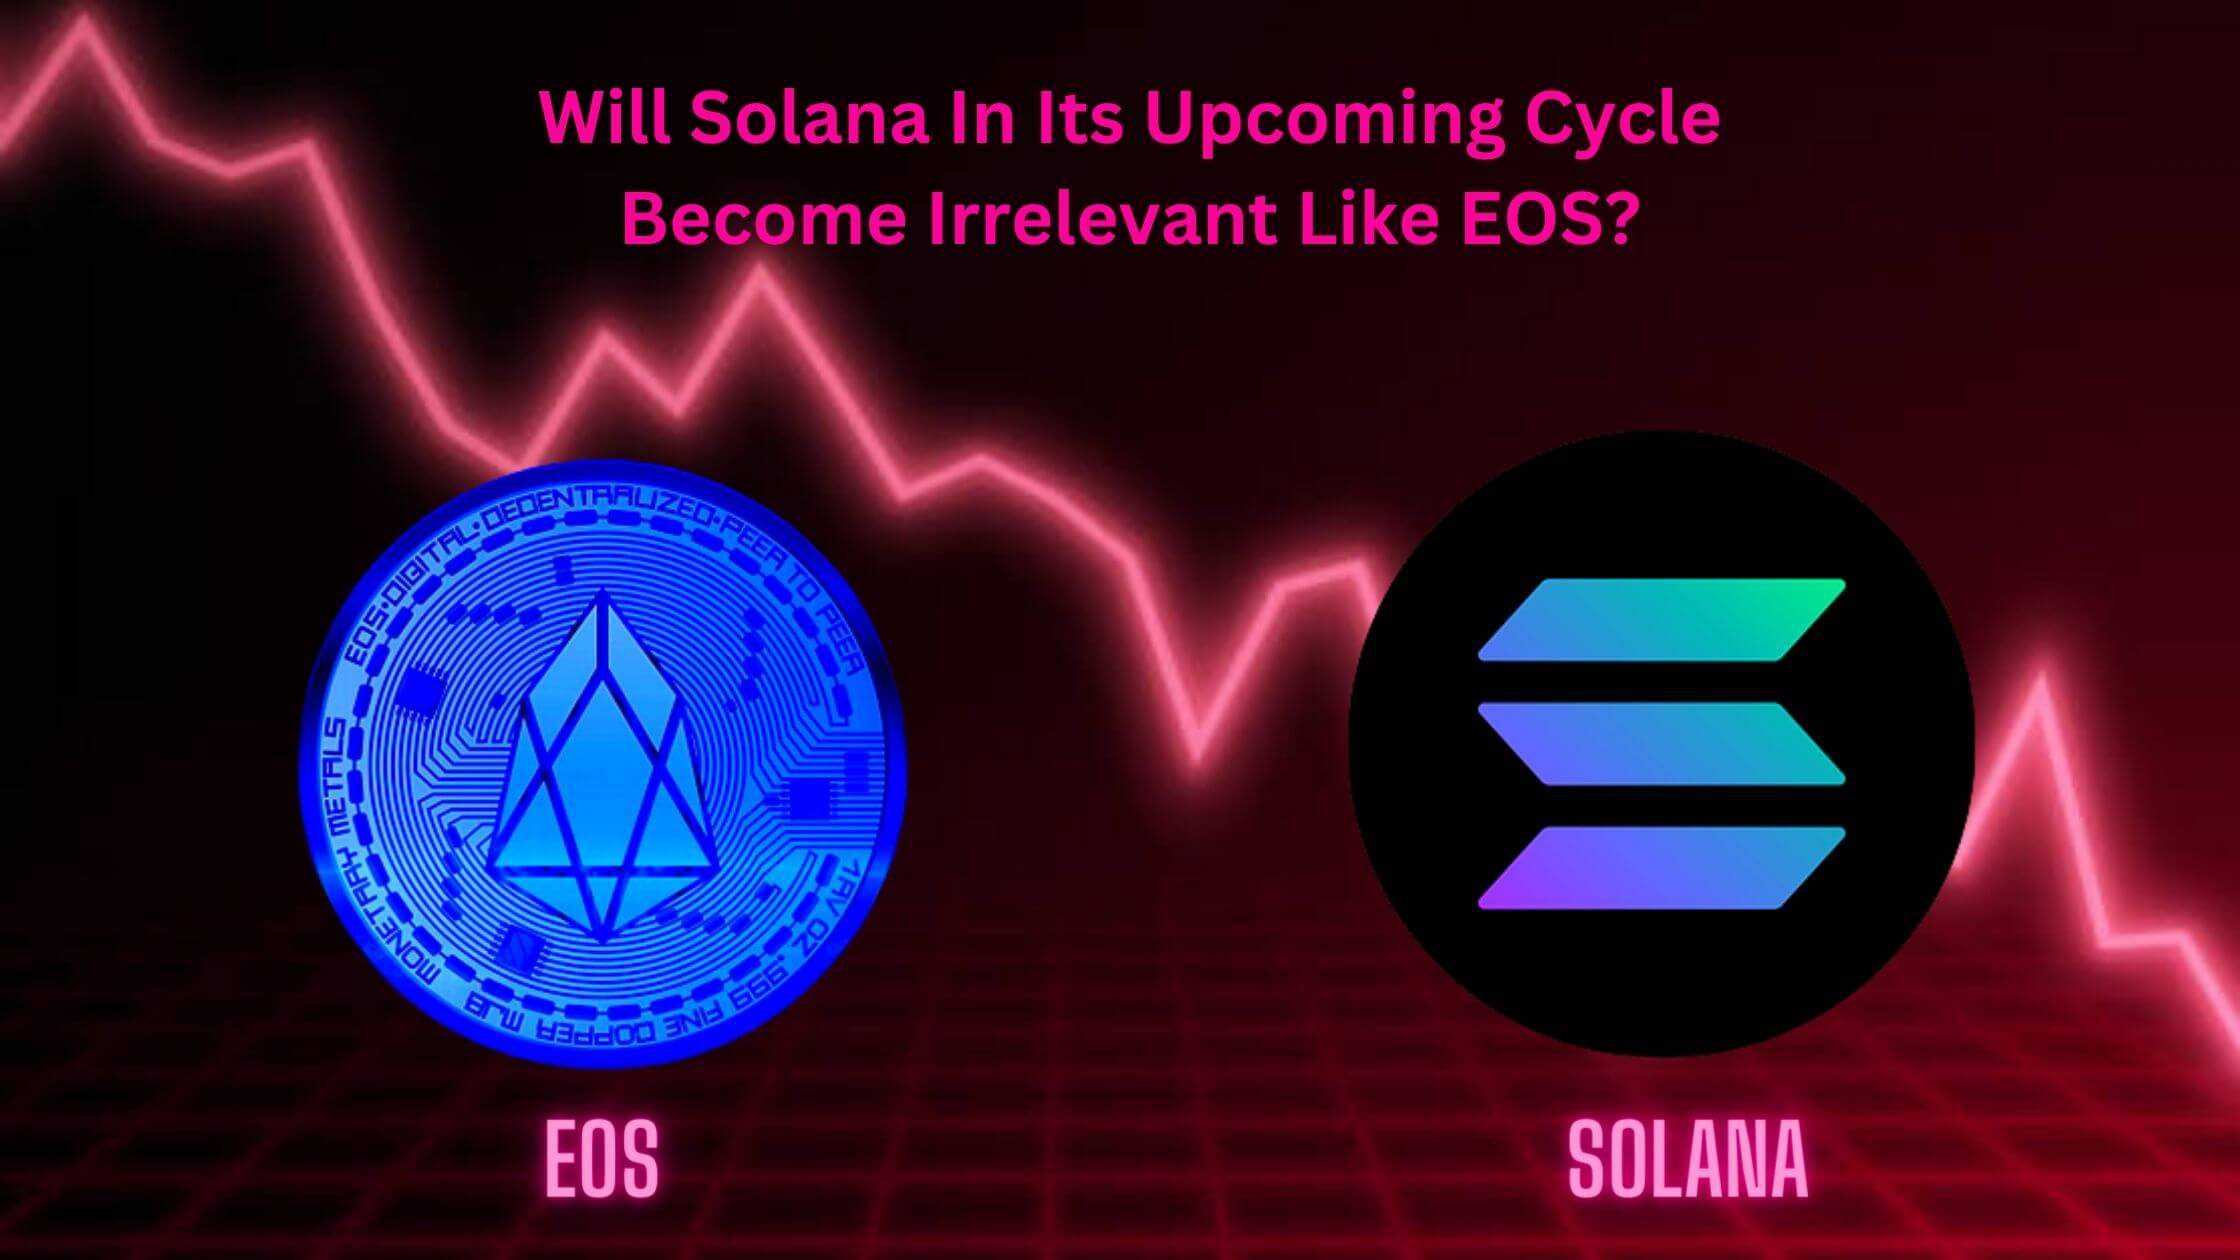 Will Solana In Its Upcoming Cycle Become Irrelevant Like EOS